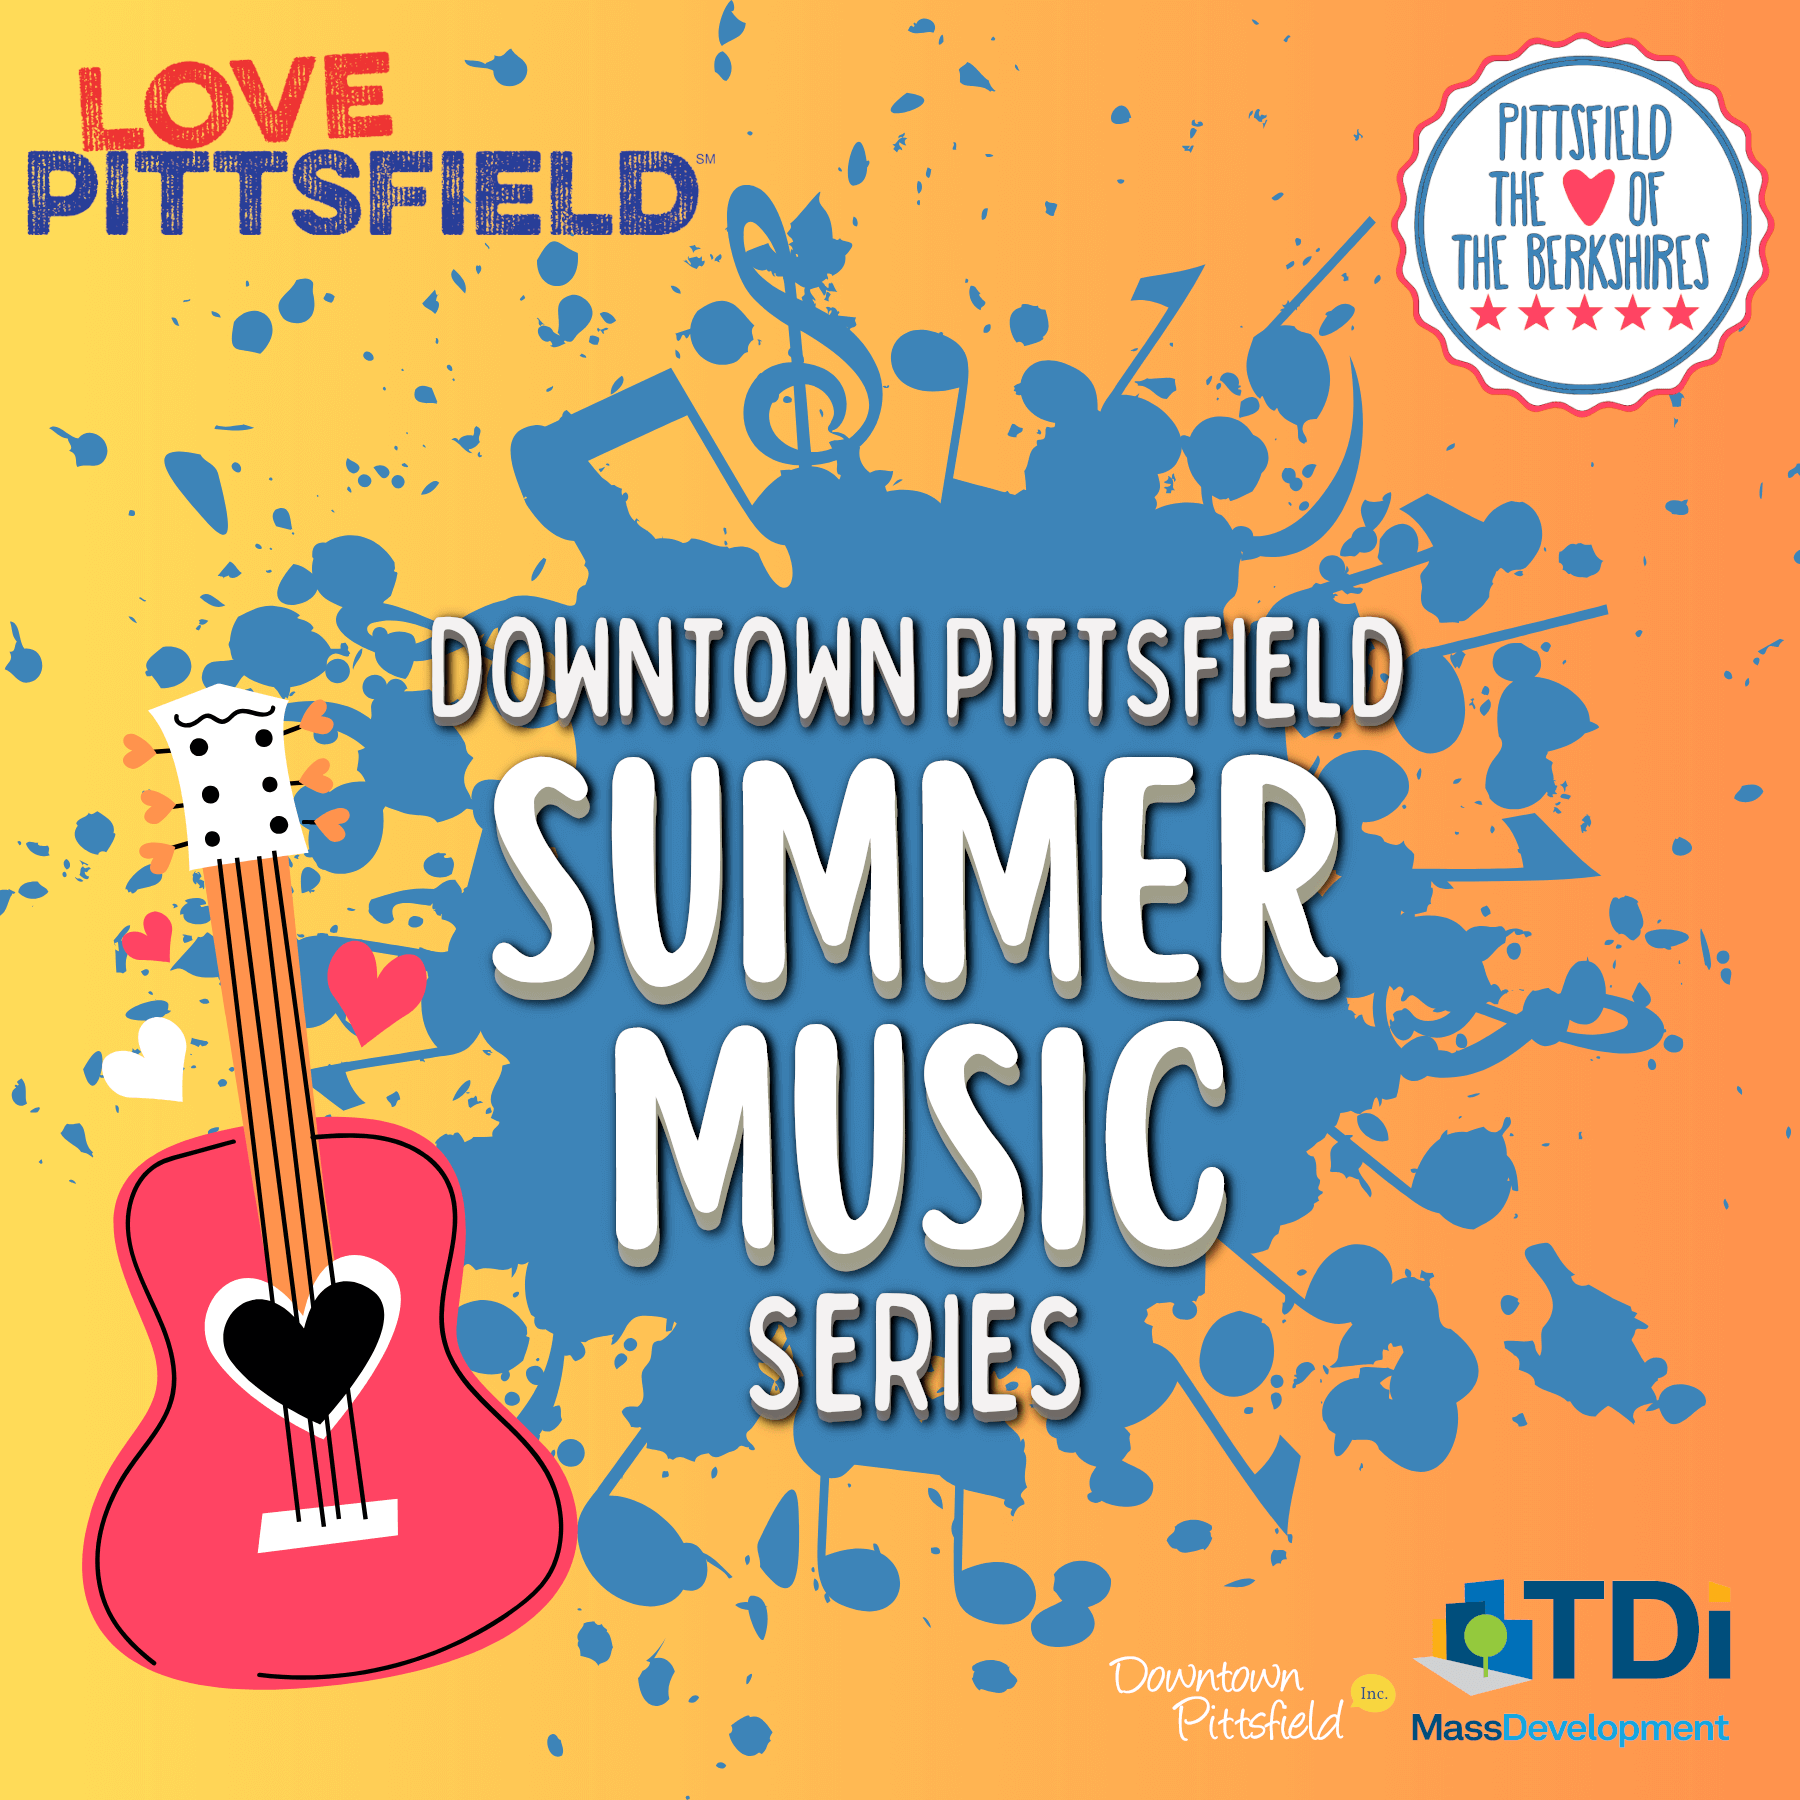 Join Pittsfield for its summer music series